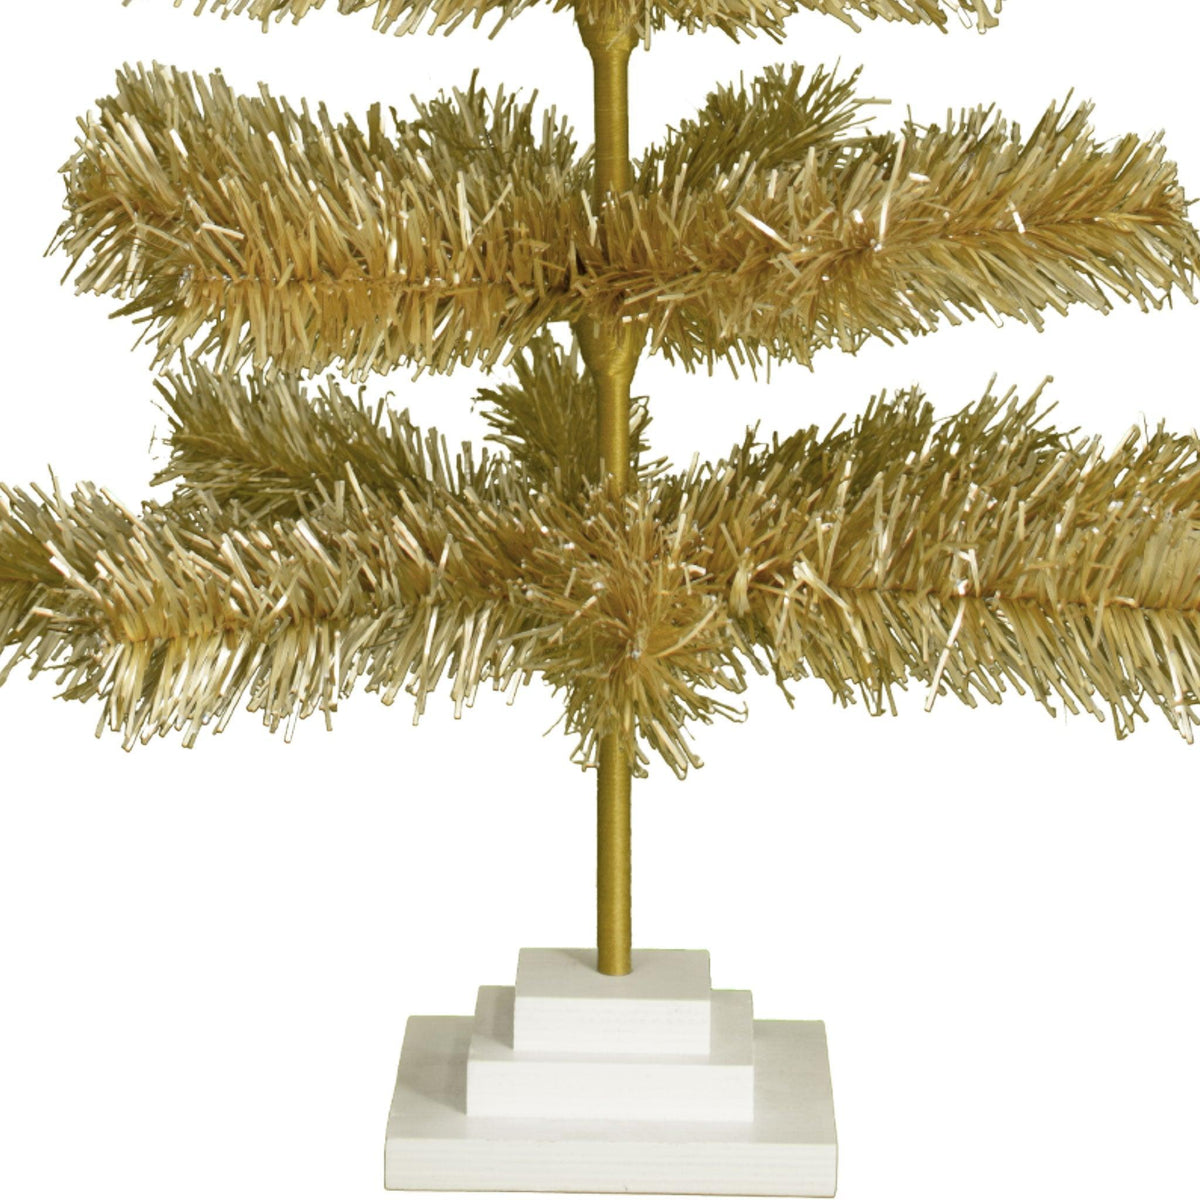 Our 36in Tall Antique Gold Christmas Tree.  Celebrate Lee Display's 120th Anniversary with our brand new Antique Gold colored tinsel Christmas Trees.  Shop for antique gold christmas trees at leedisplay.com